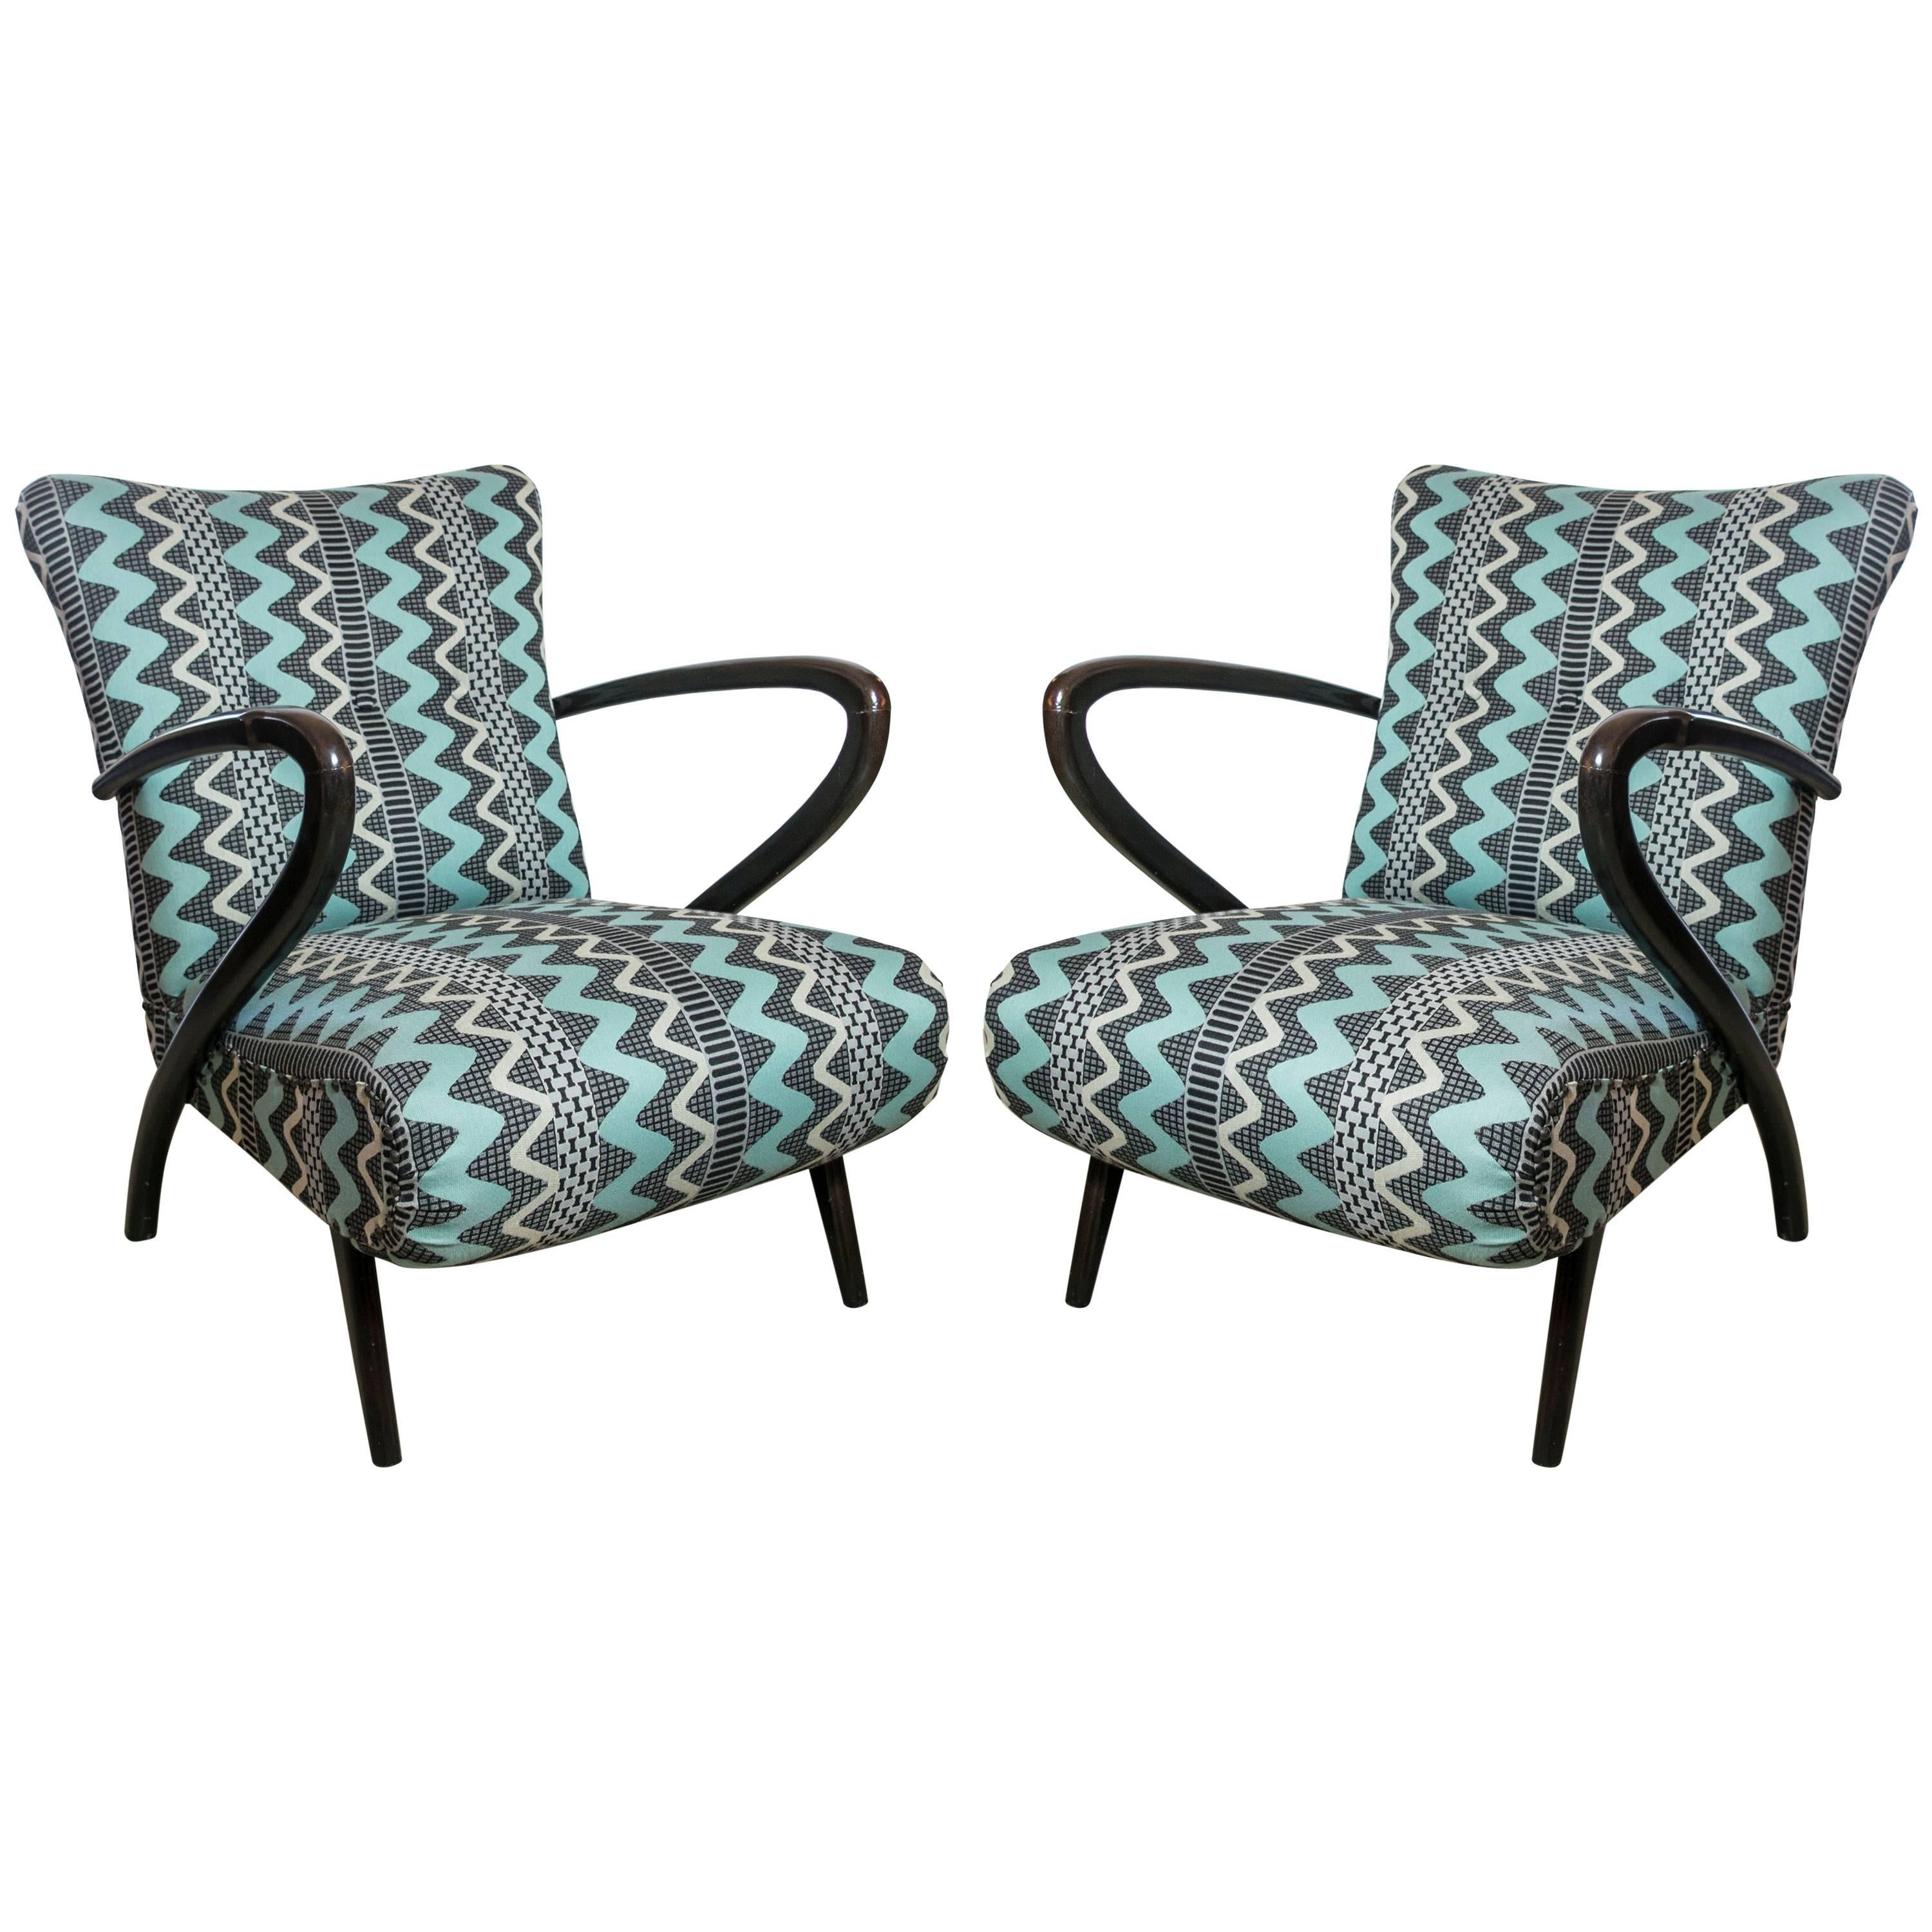 Pair of Midcentury Italian Chairs with Bentwood Arms in Knoll Upholstery